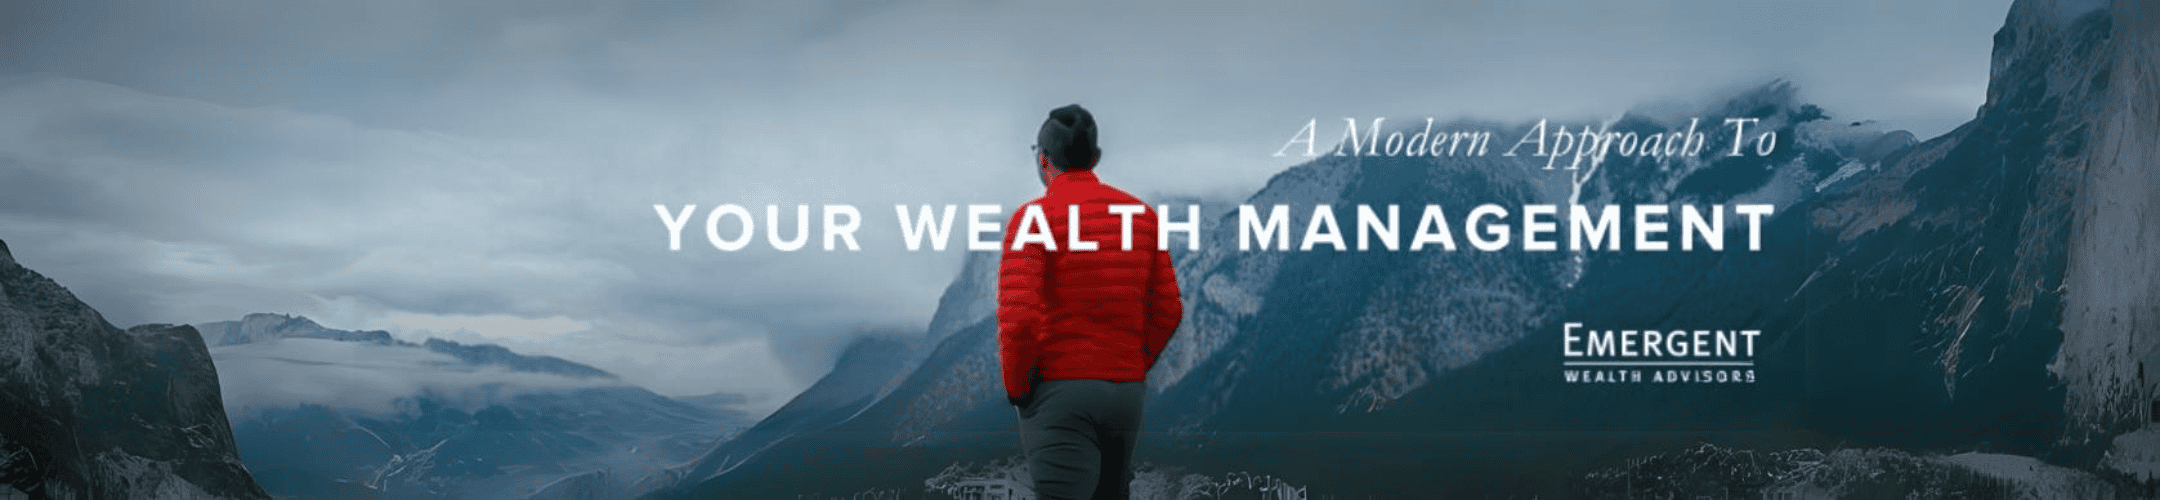 An individual in a red jacket stands gazing at a breathtaking mountainous landscape, symbolizing a visionary perspective, alongside text 'a modern approach to your wealth management - emergent wealth advisors'.